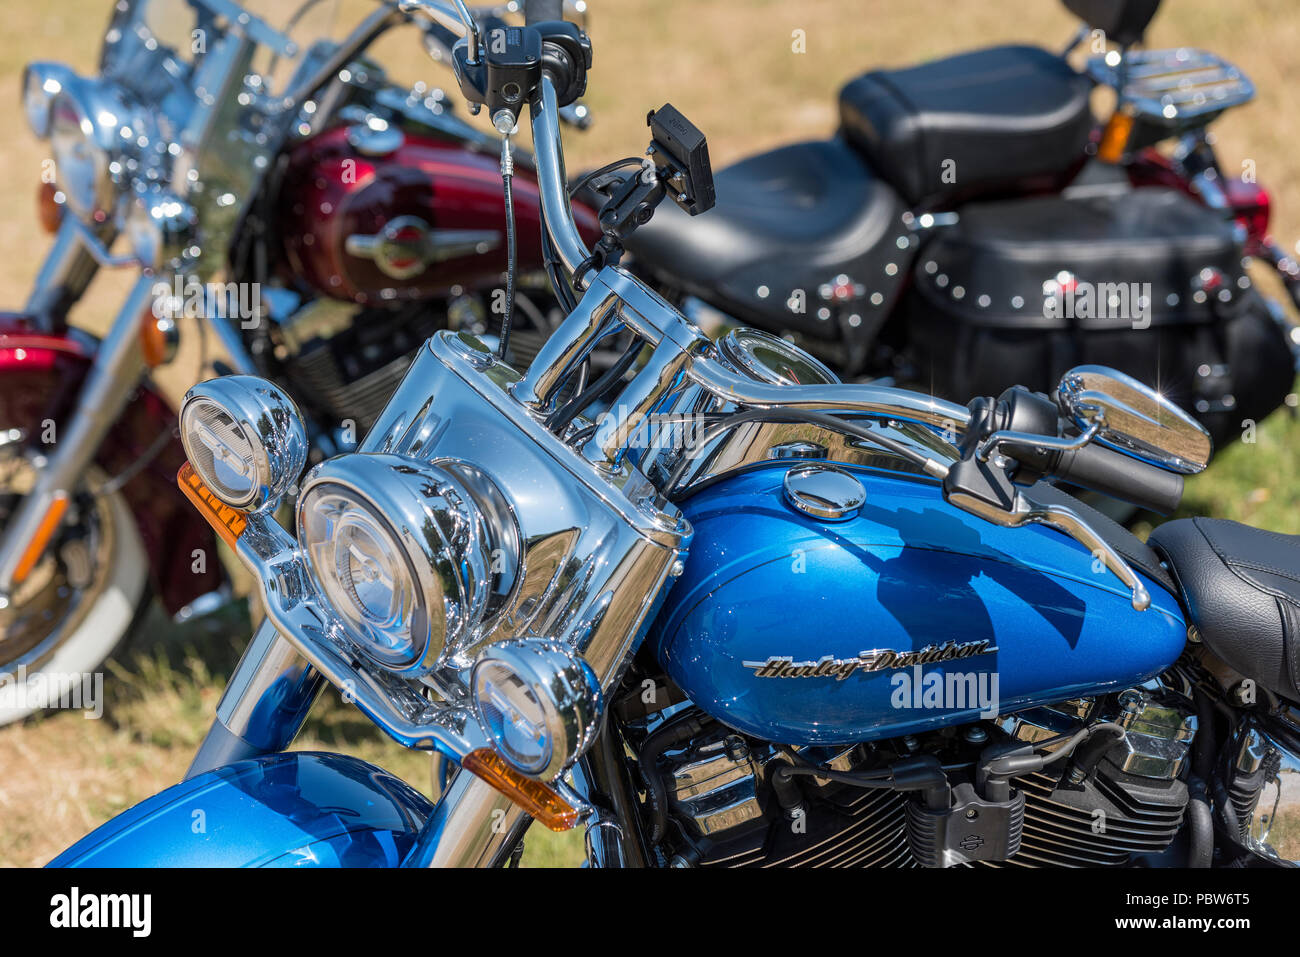 two Harley Davidson motorcycles with chrome and metallic paints. Chopper motorcycles. Stock Photo